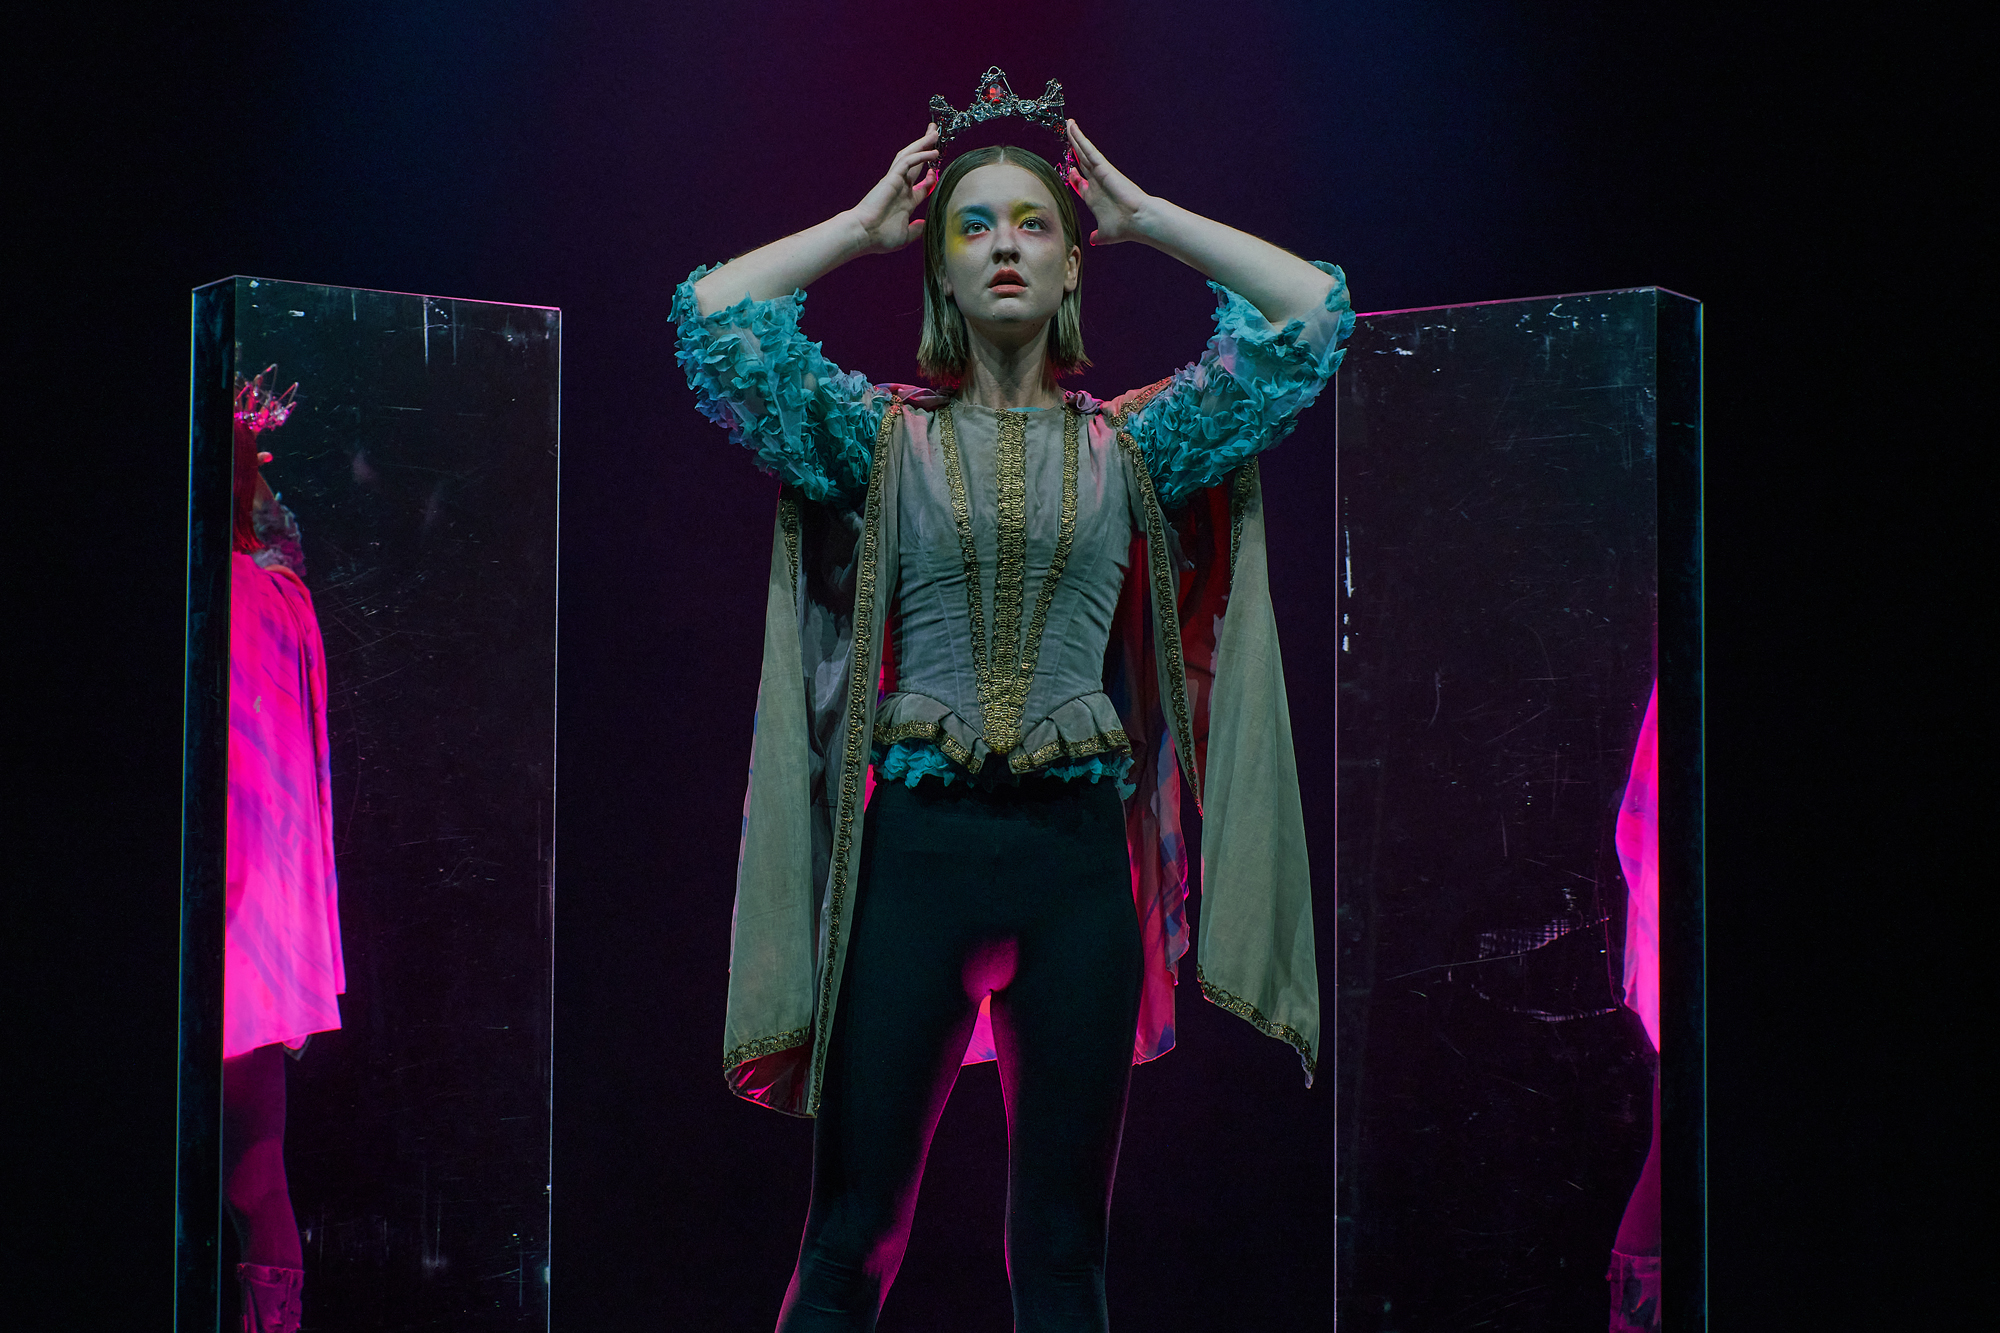 A photo of Tintomara. She is standing up looking into the distance, holding the crown over her head. Behind her are two mirrors, reflecting her cape.